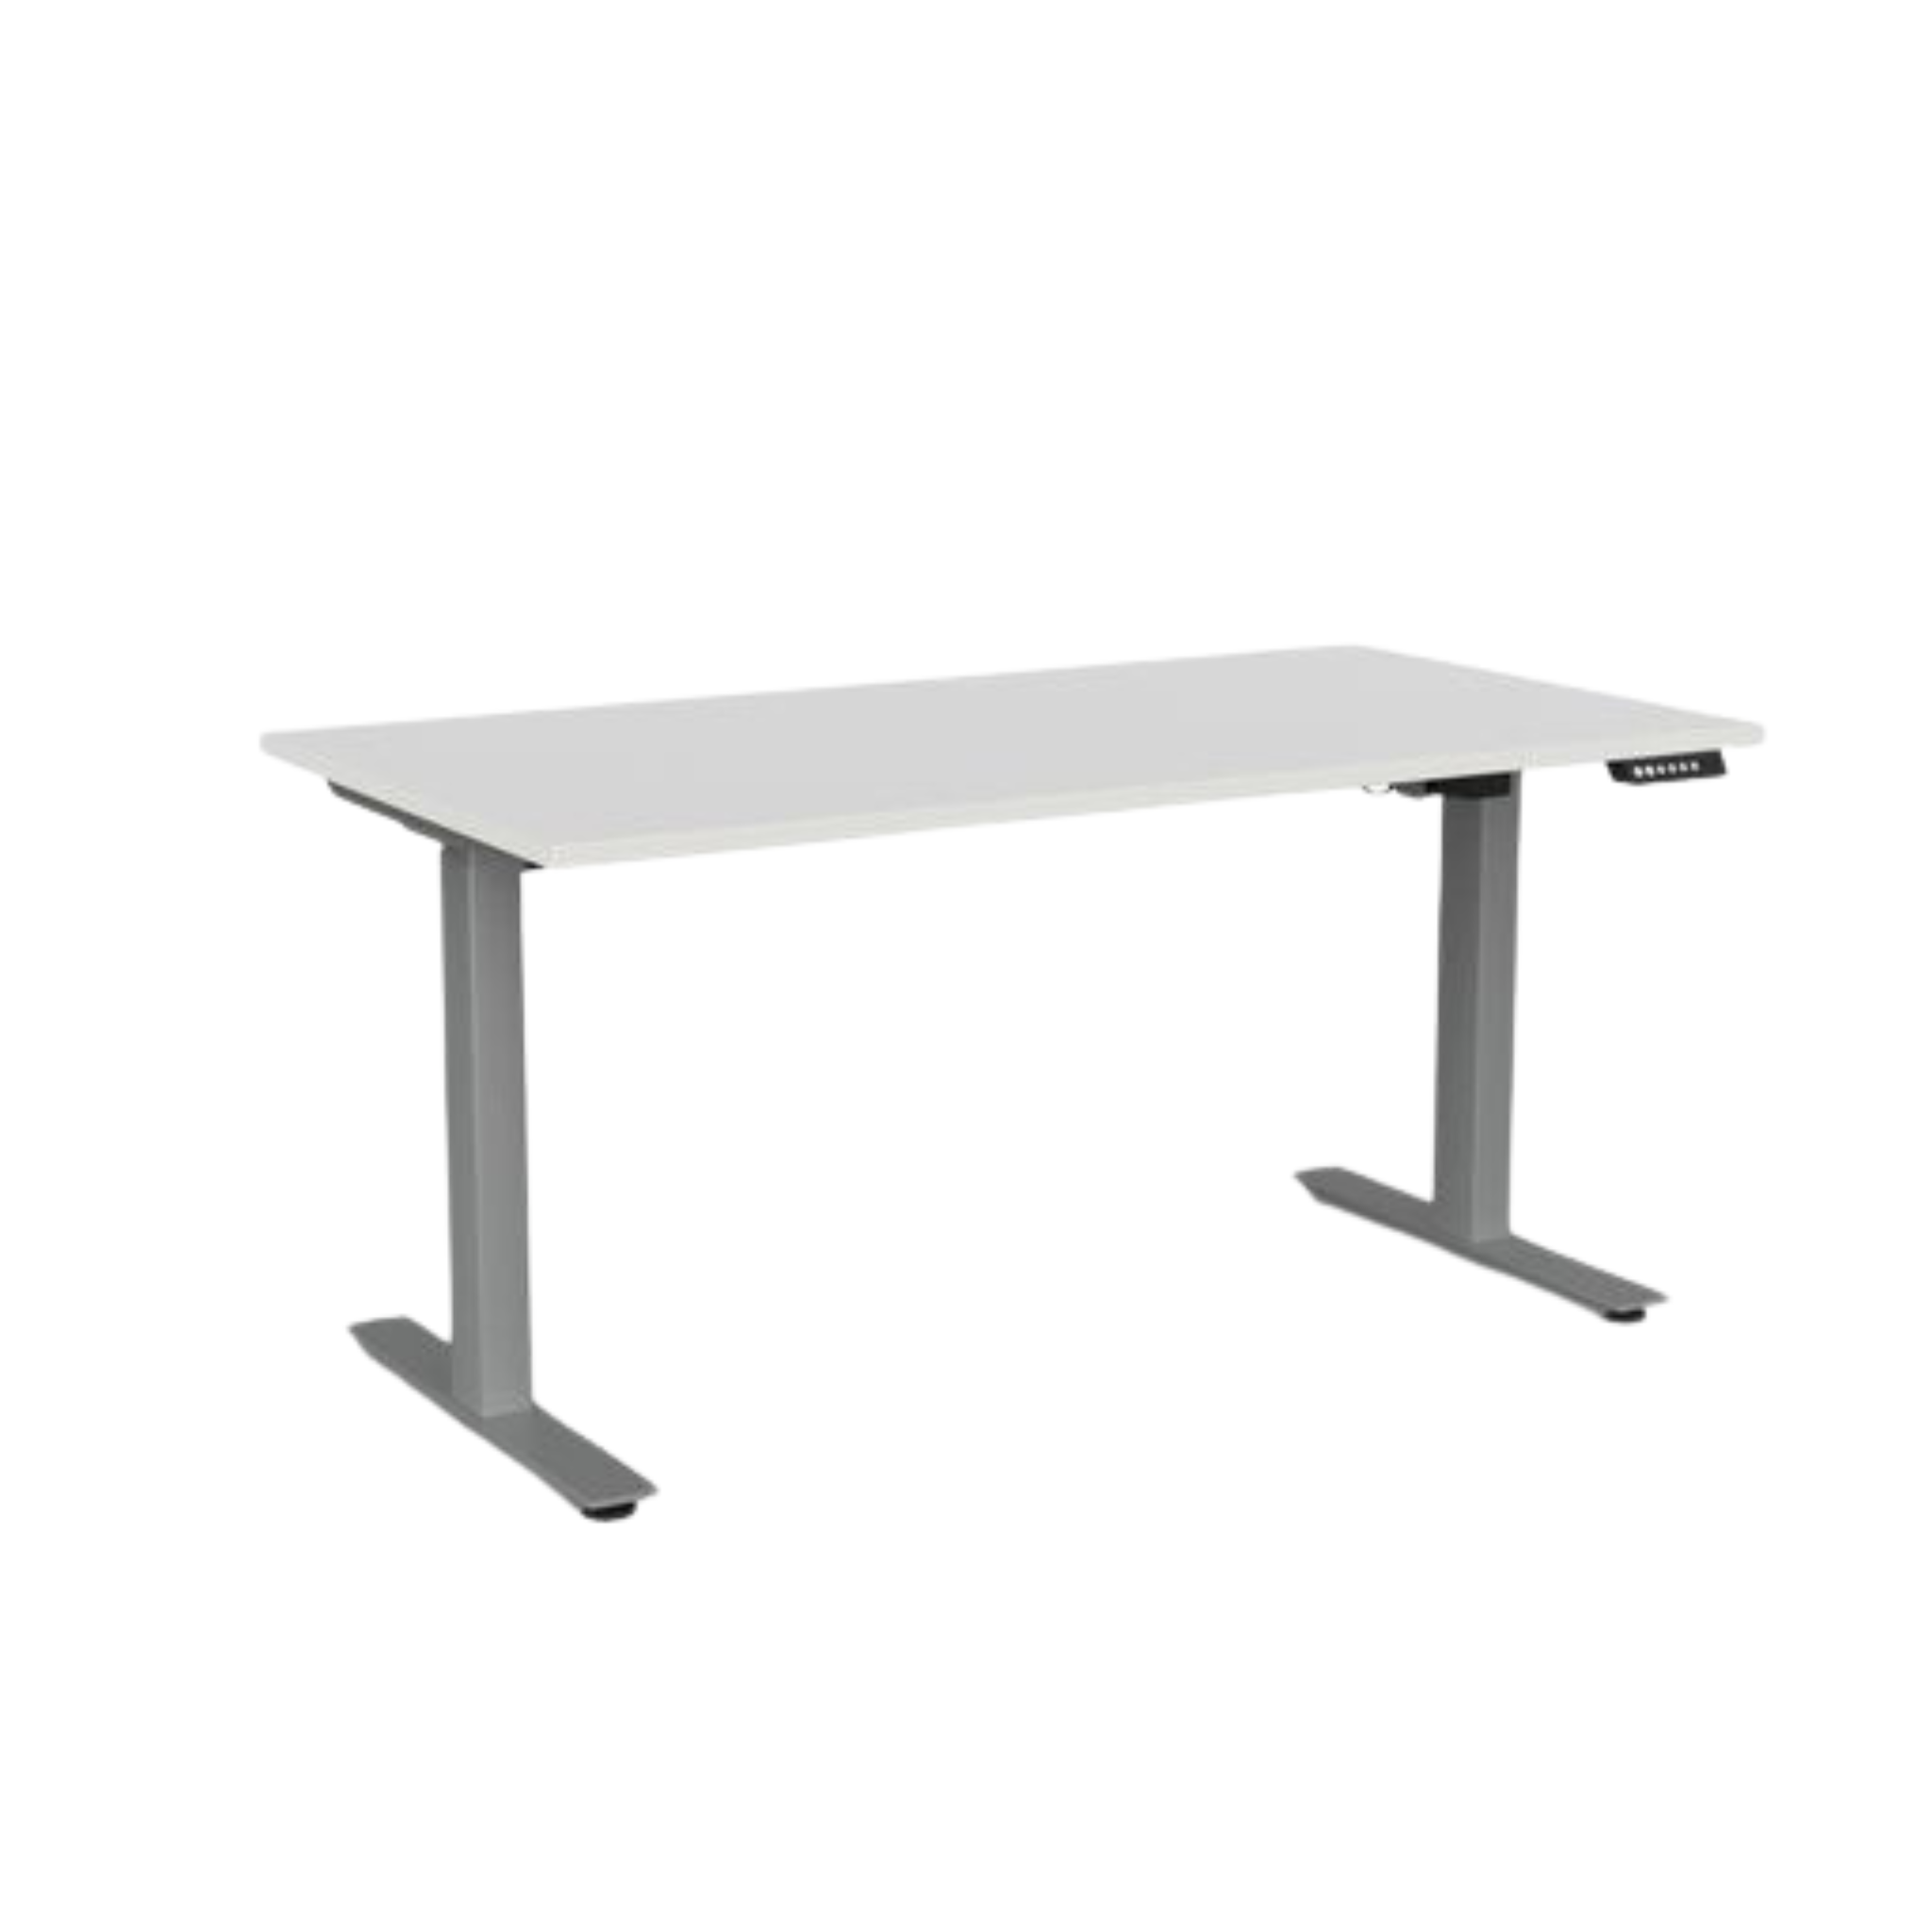 Agile 2 electric sit to stand desk with silver frame and white top